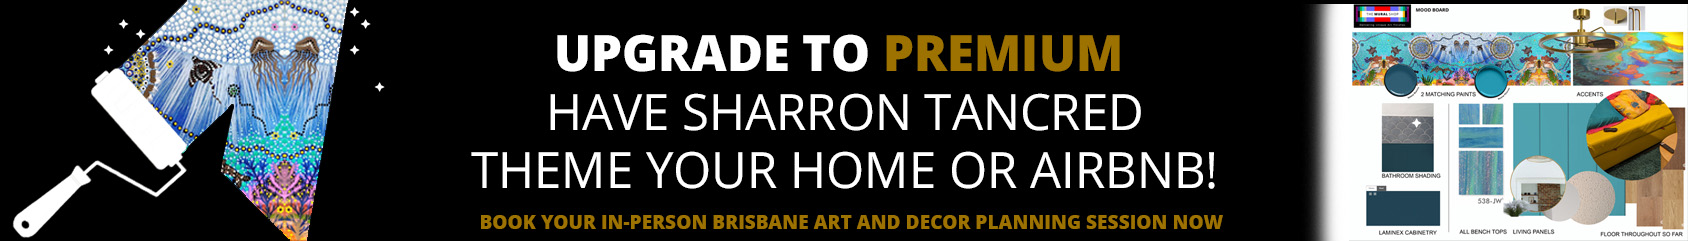 banner with link - Book a in-person Brisbane Art and Decor Planning Session with Sharron Tancred to theme your home or airnbnb - The Mural Shop